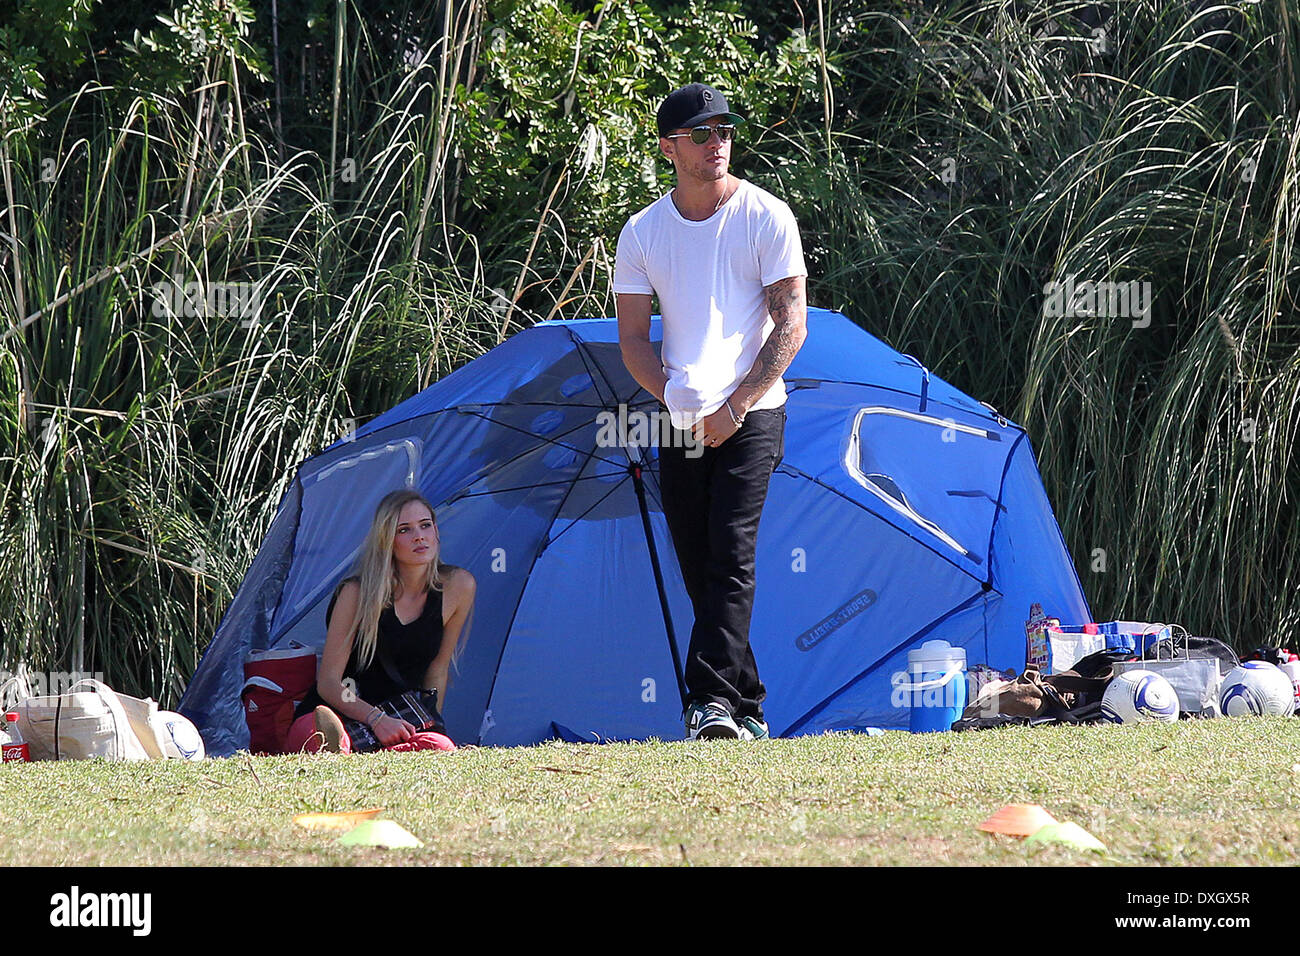 Ryan Phillippe, Paulina Slagter Ryan Phillippe at a park in Brentwood with his girlfriend to watch his son's soccer game Los Angeles, California - 03.11.12 Featuring: Ryan Phillippe,Paulina Slagter When: 03 Nov 2012 Stock Photo